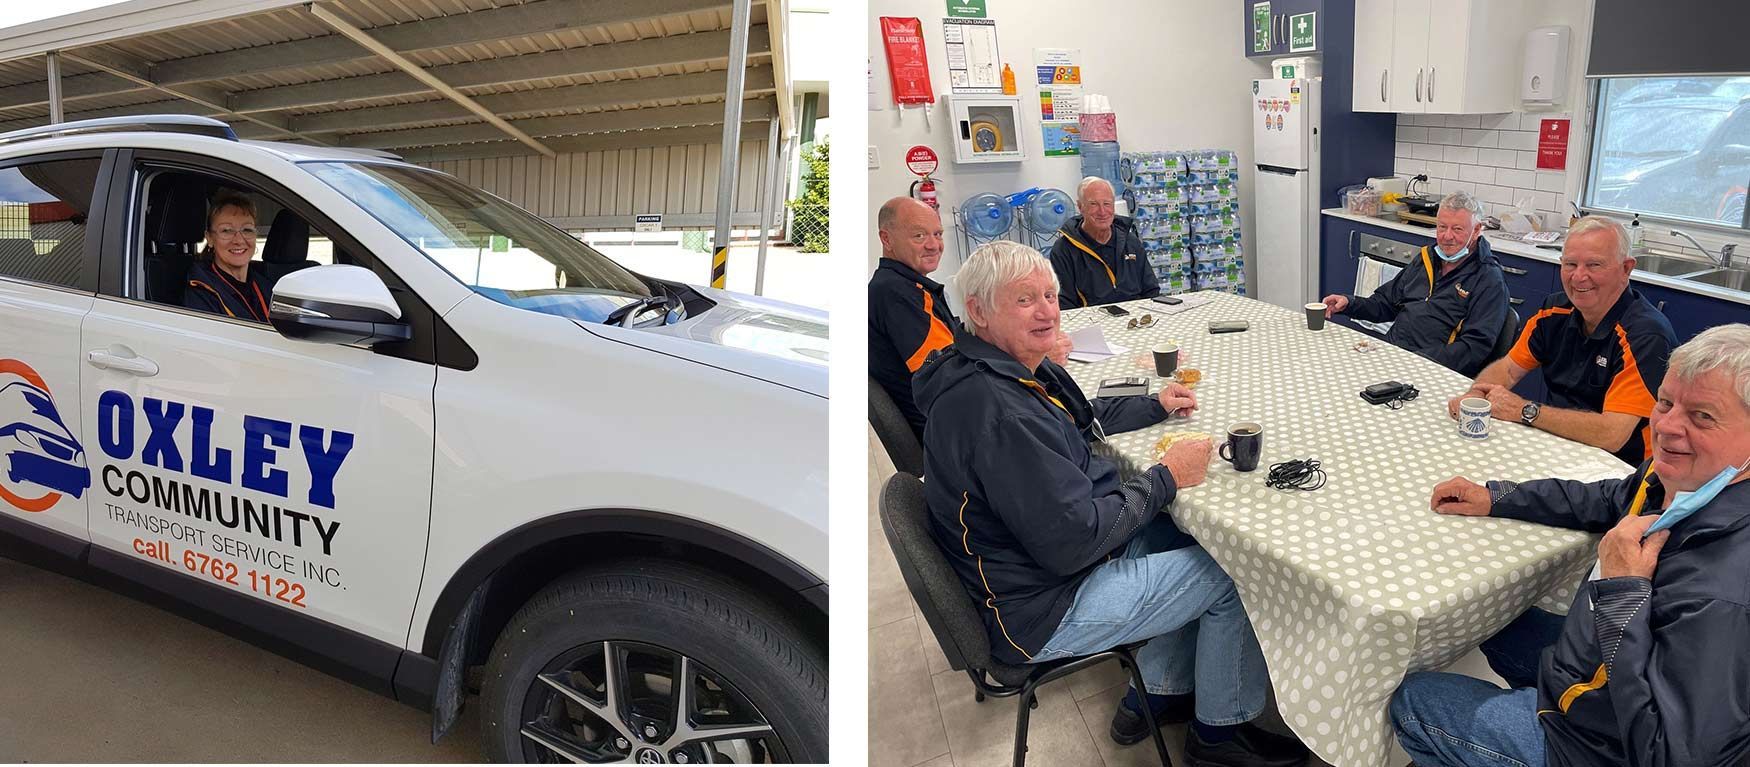 Robyn Driving The Oxley Community Car And Group Of Men Volunteer Drivers — Aged Care Transport in Tamworth, NSW